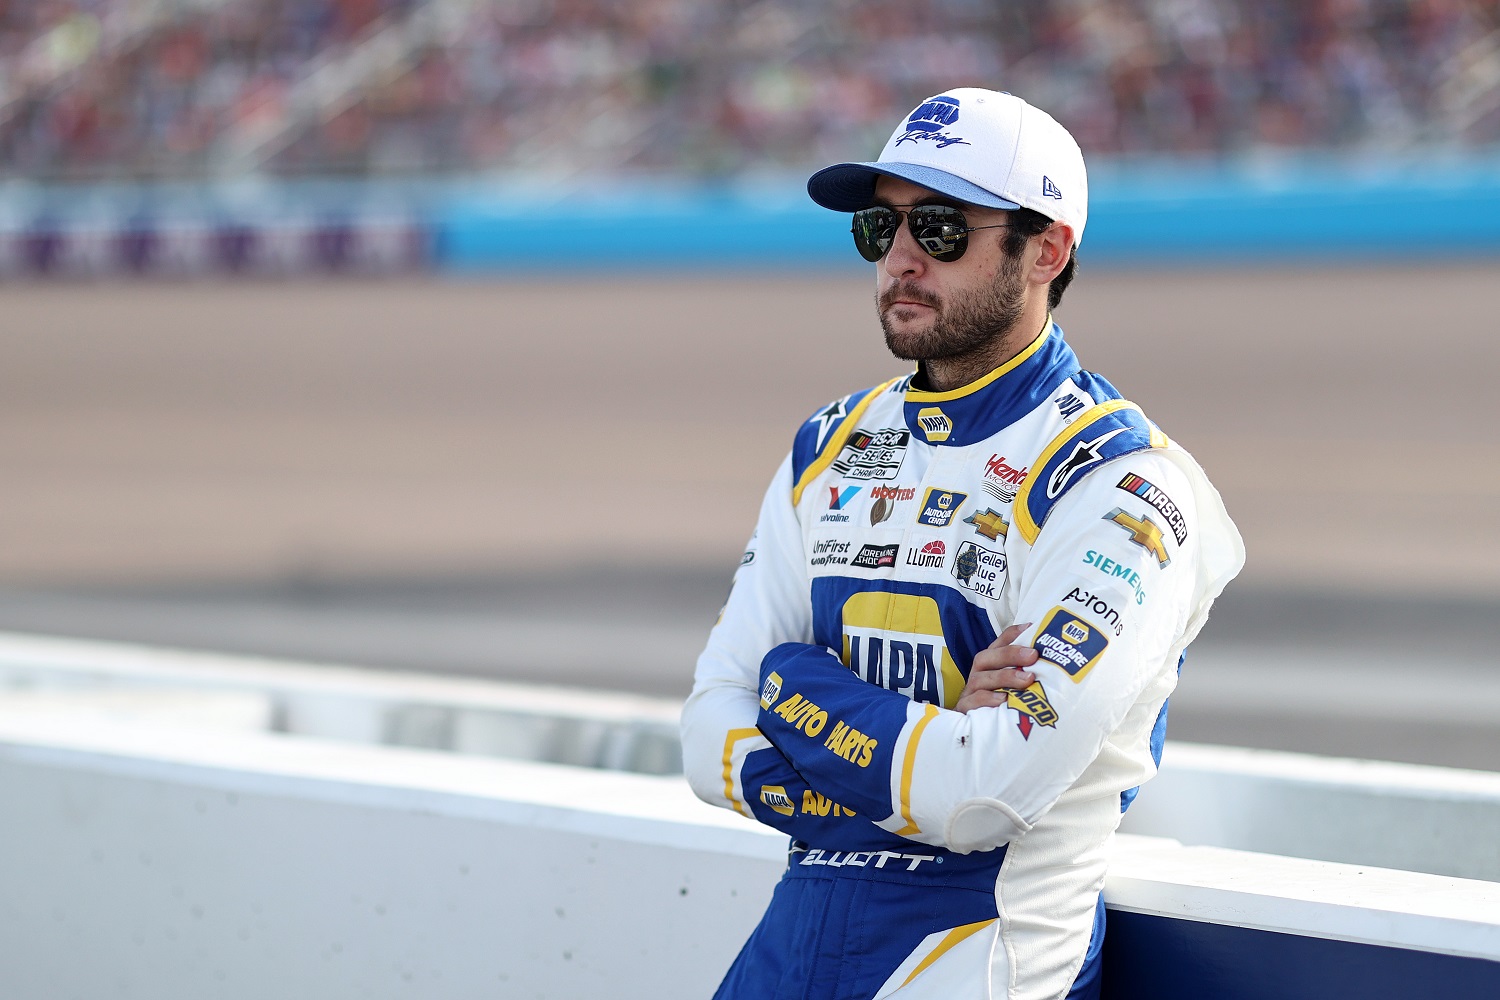 Chase Elliott, driver of the No. 9 Chevrolet, waits on the grid prior to the NASCAR Cup Series Championship at Phoenix Raceway on Nov. 7, 2021, in Avondale, Arizona. | Chris Graythen/Getty Images